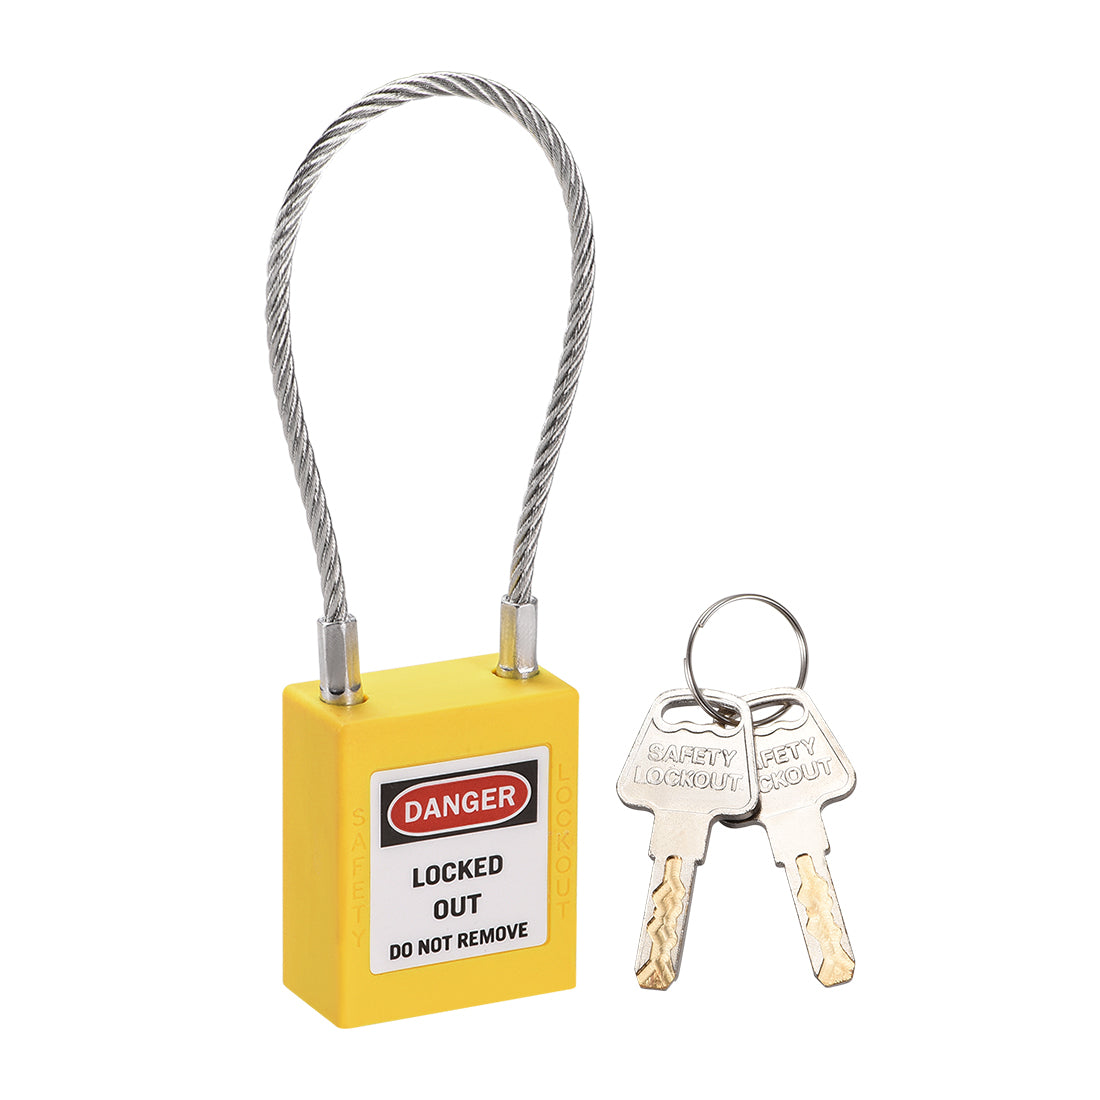 uxcell Uxcell Lockout Tagout Locks 3.3 Inch Shackle Key Different Safety Padlock Plastic Lock Yellow